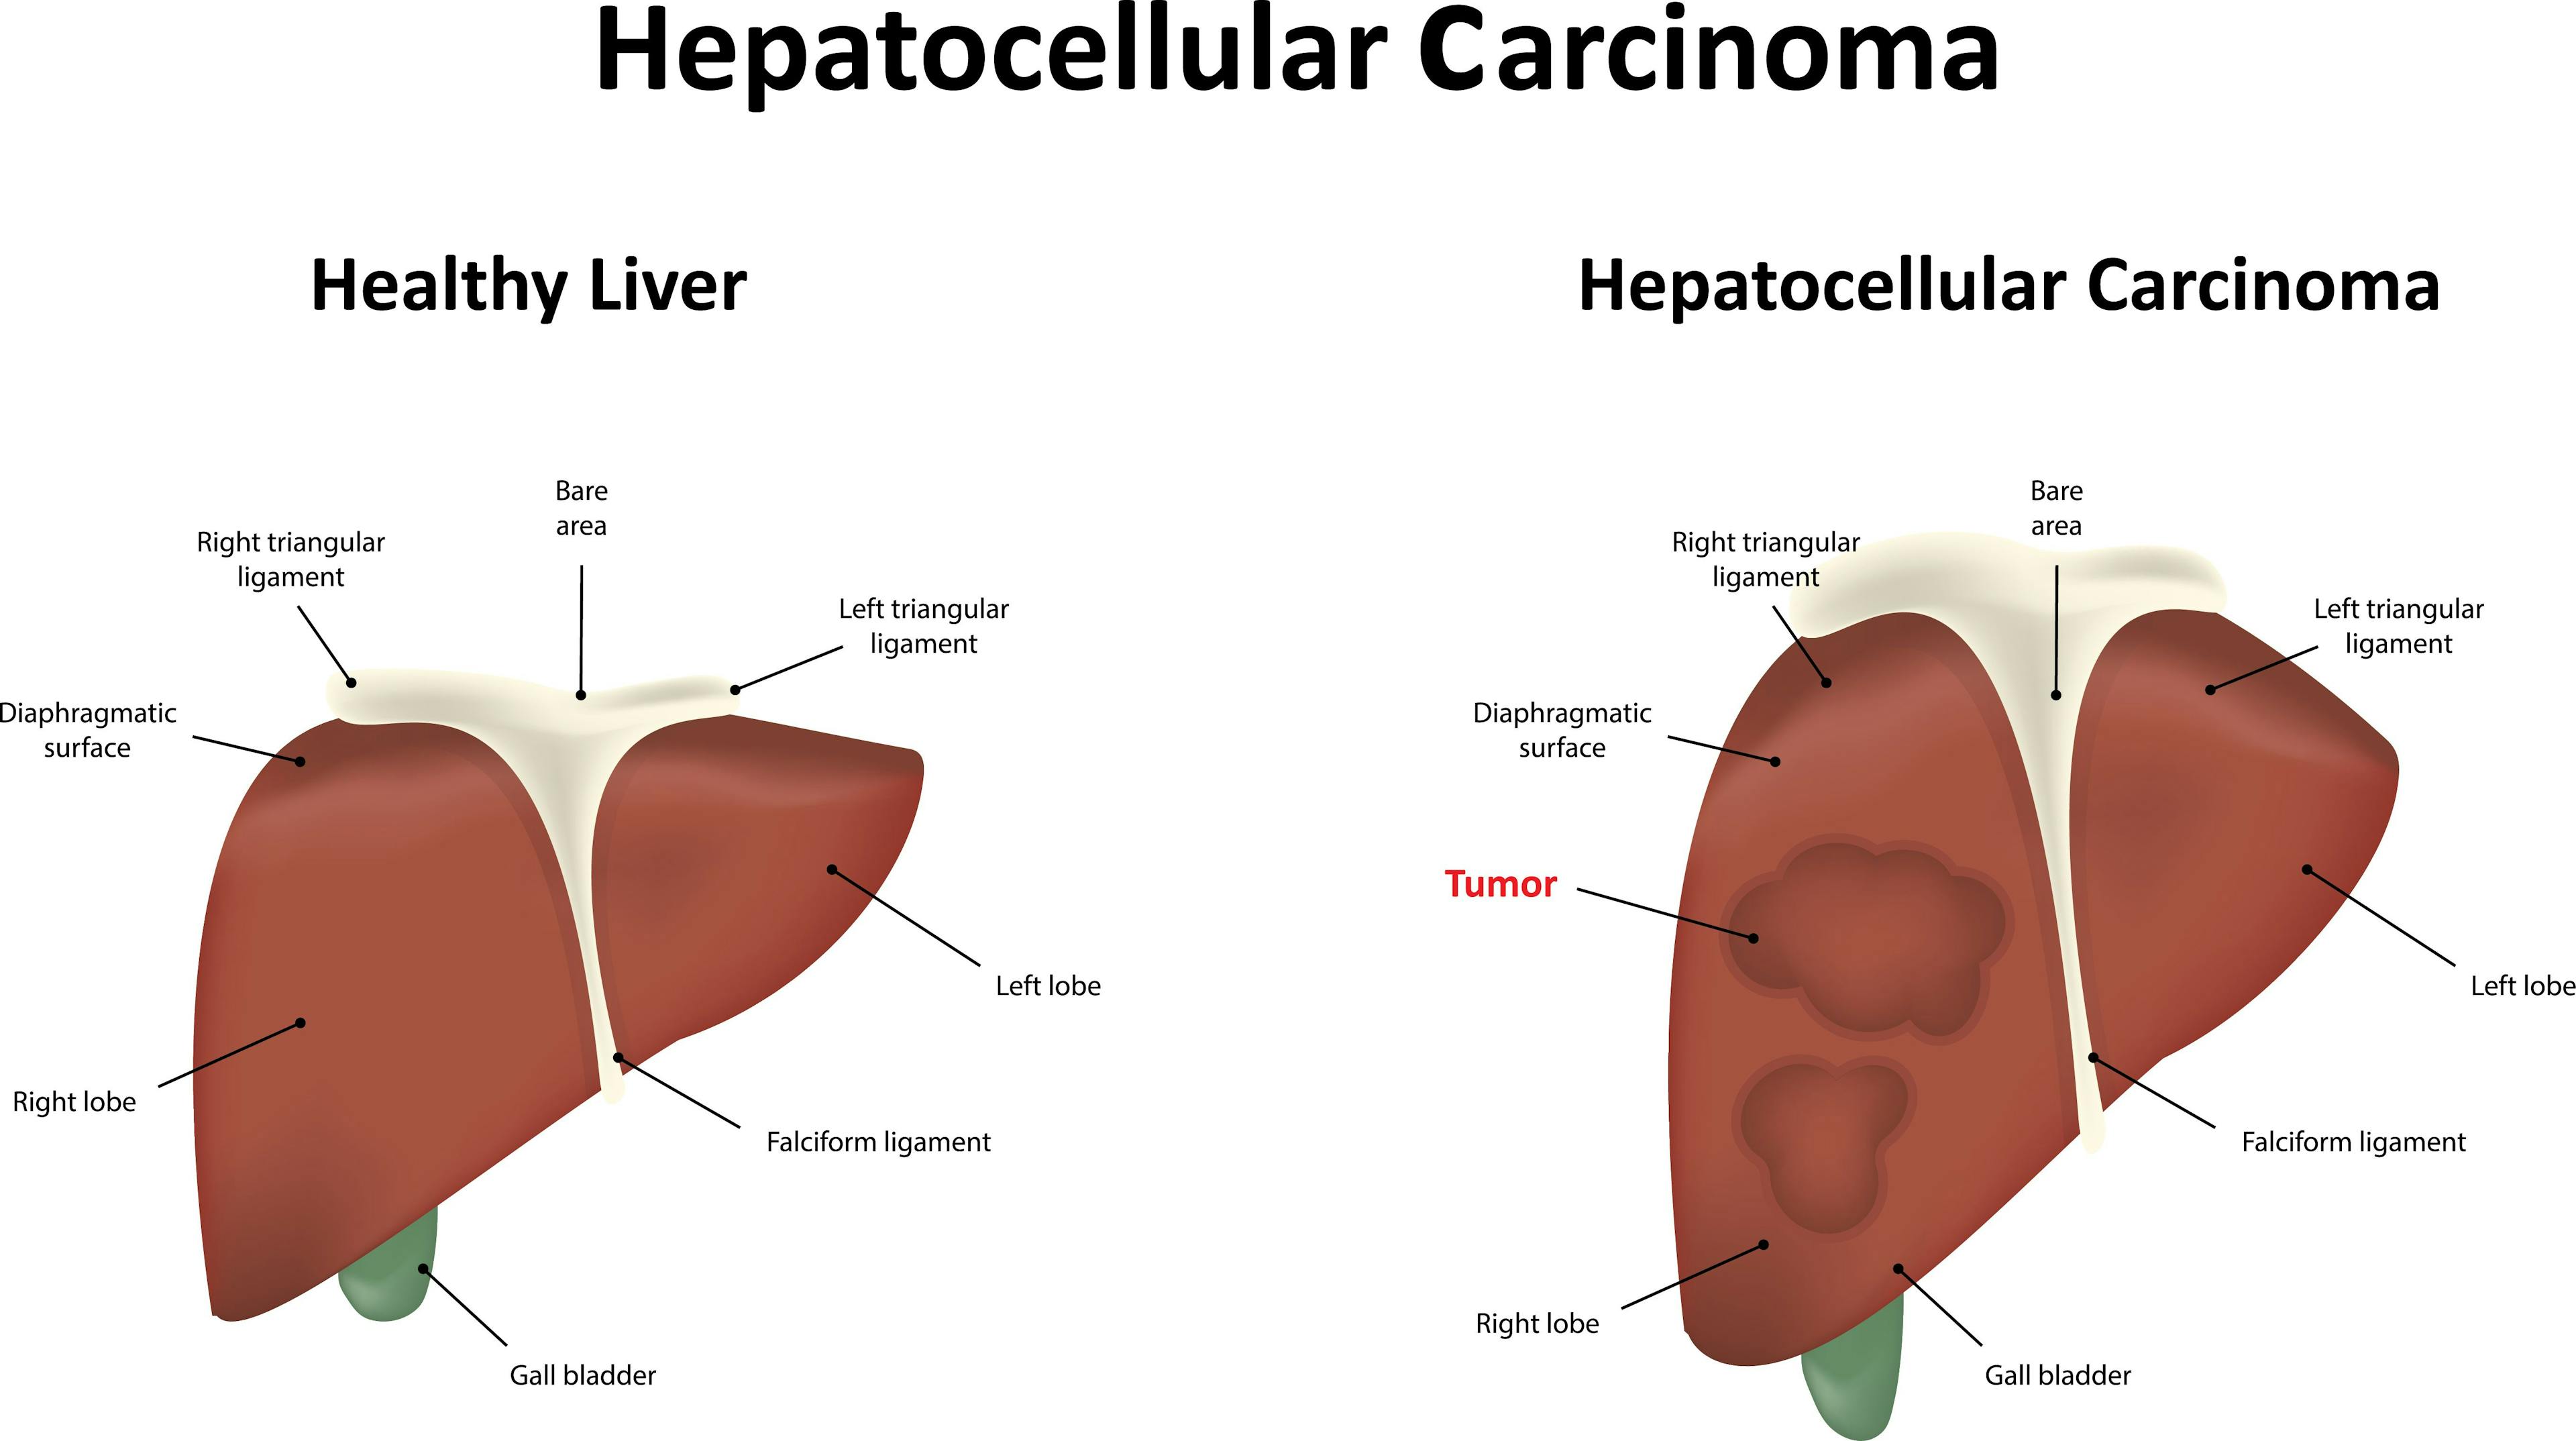 Antivirals After Liver Resection for HBV-Associated Hepatocellular Carcinoma: Which Is Better, Tenofovir vs. Entecavir?